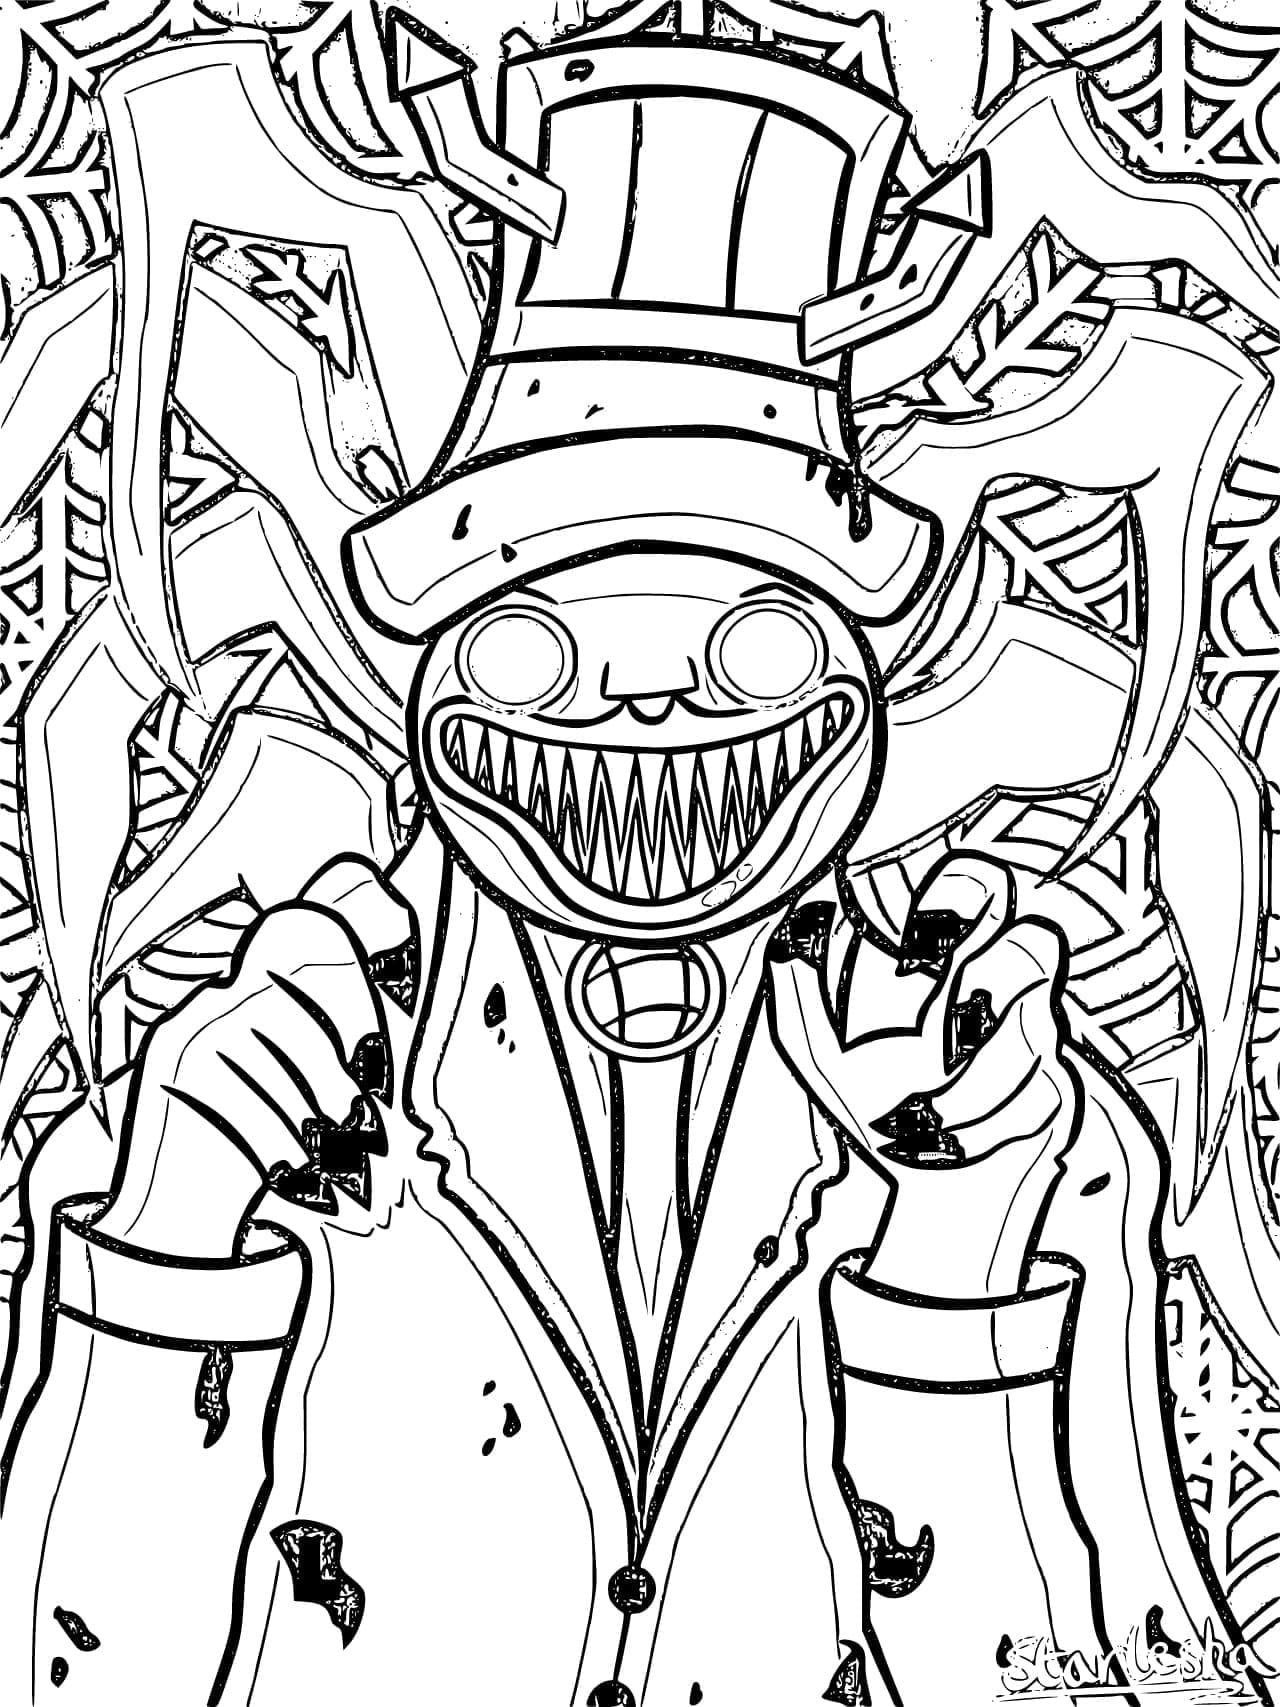 Cho-Choo Charles Monster Train coloring page - Download, Print or Color ...